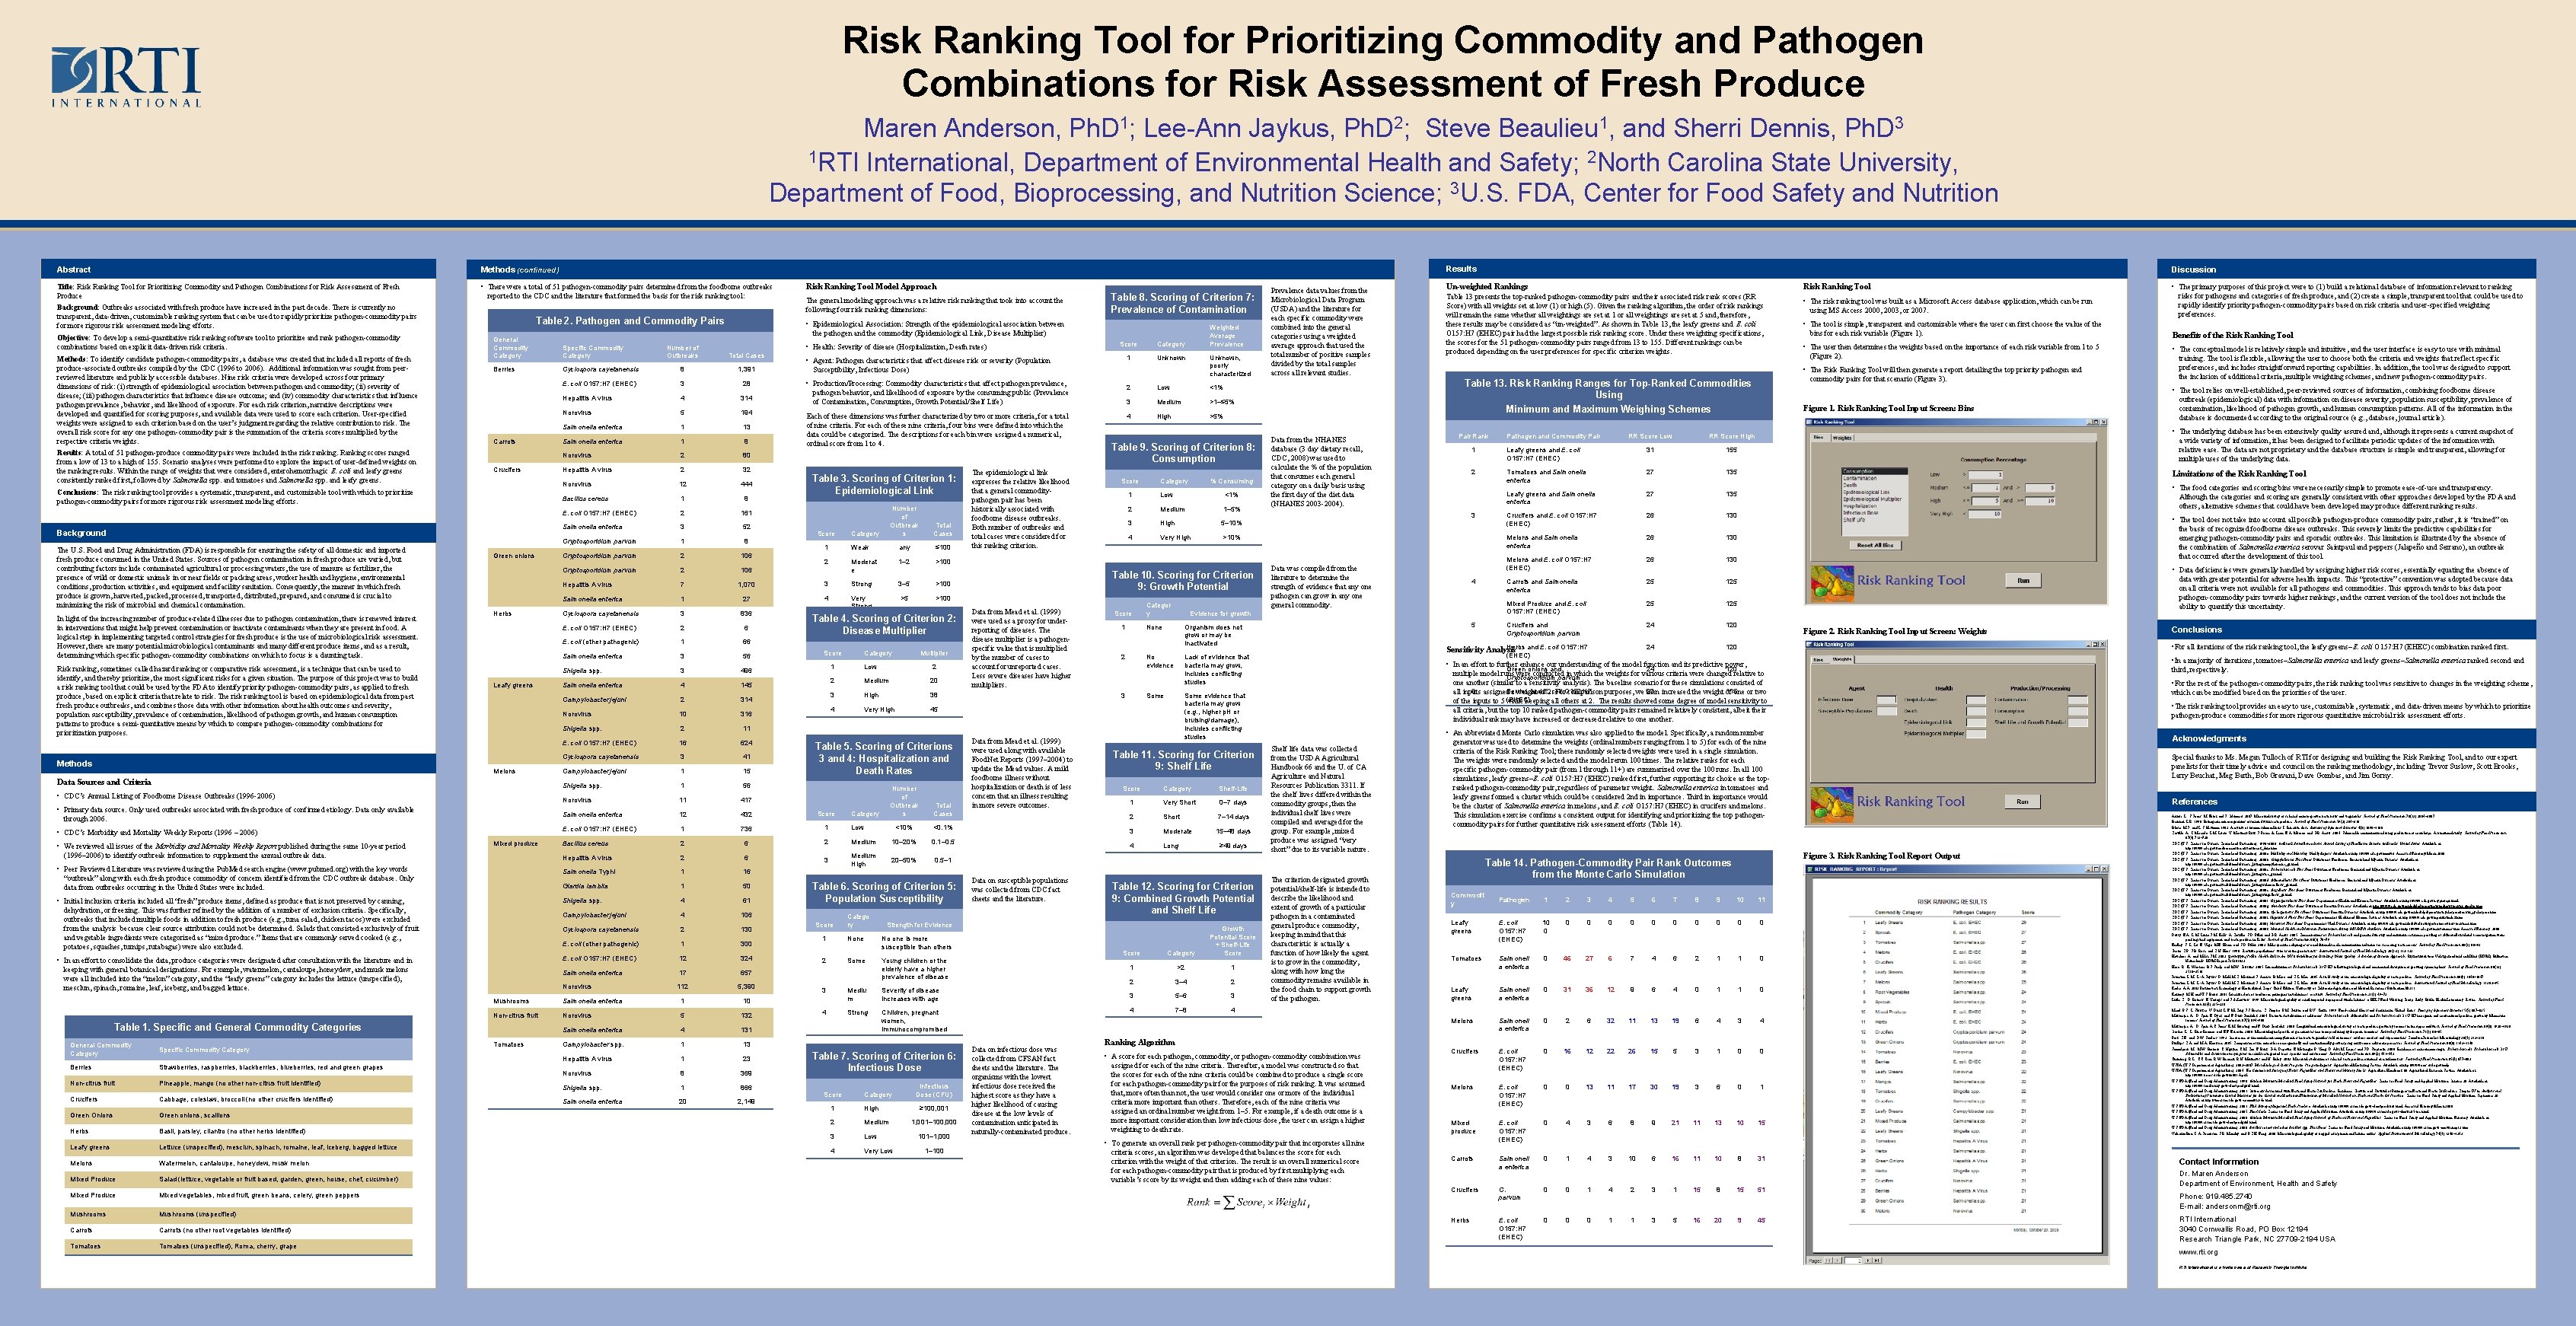 Risk Ranking Tool for Prioritizing Commodity and Pathogen Combinations for Risk Assessment of Fresh